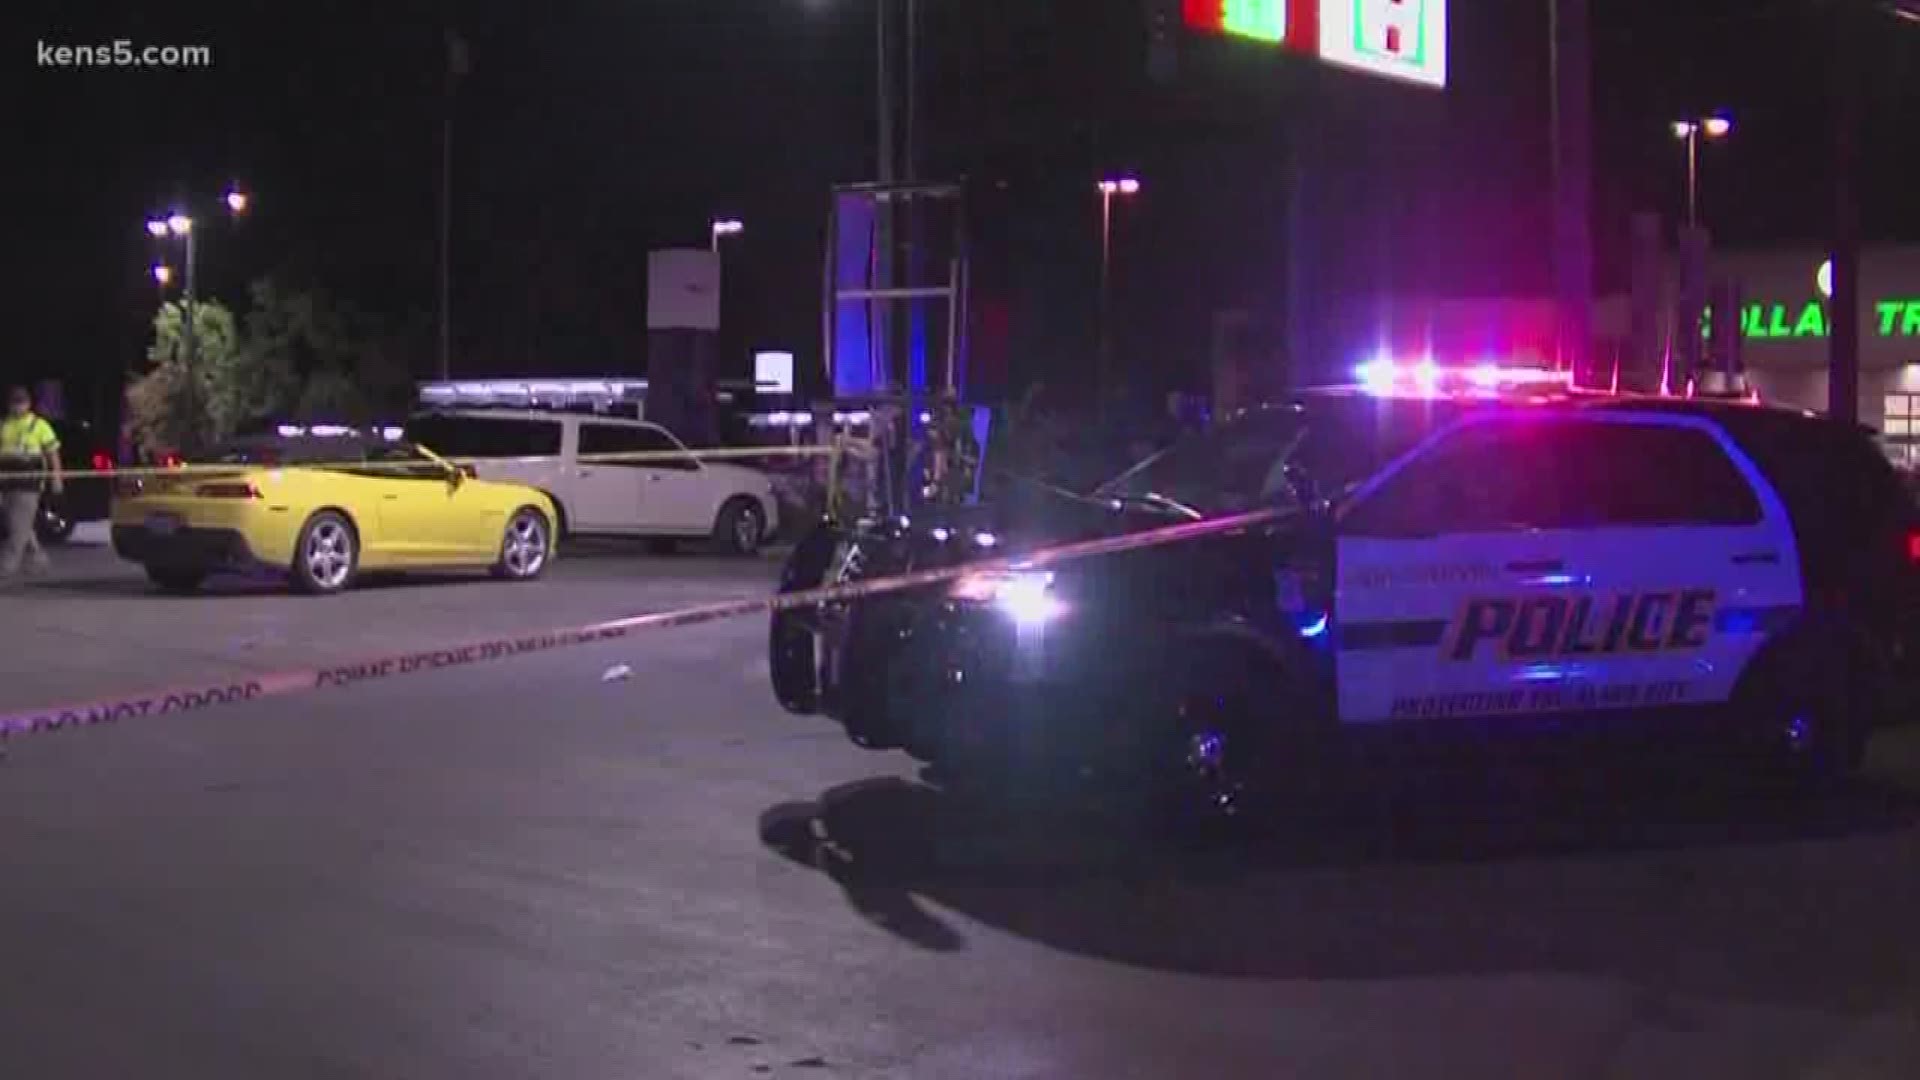 A man was hit by a sports car at the intersection of Zarzamora and Culebra. While police were tending to him, another vehicle pulled up carrying a gun shot victim.